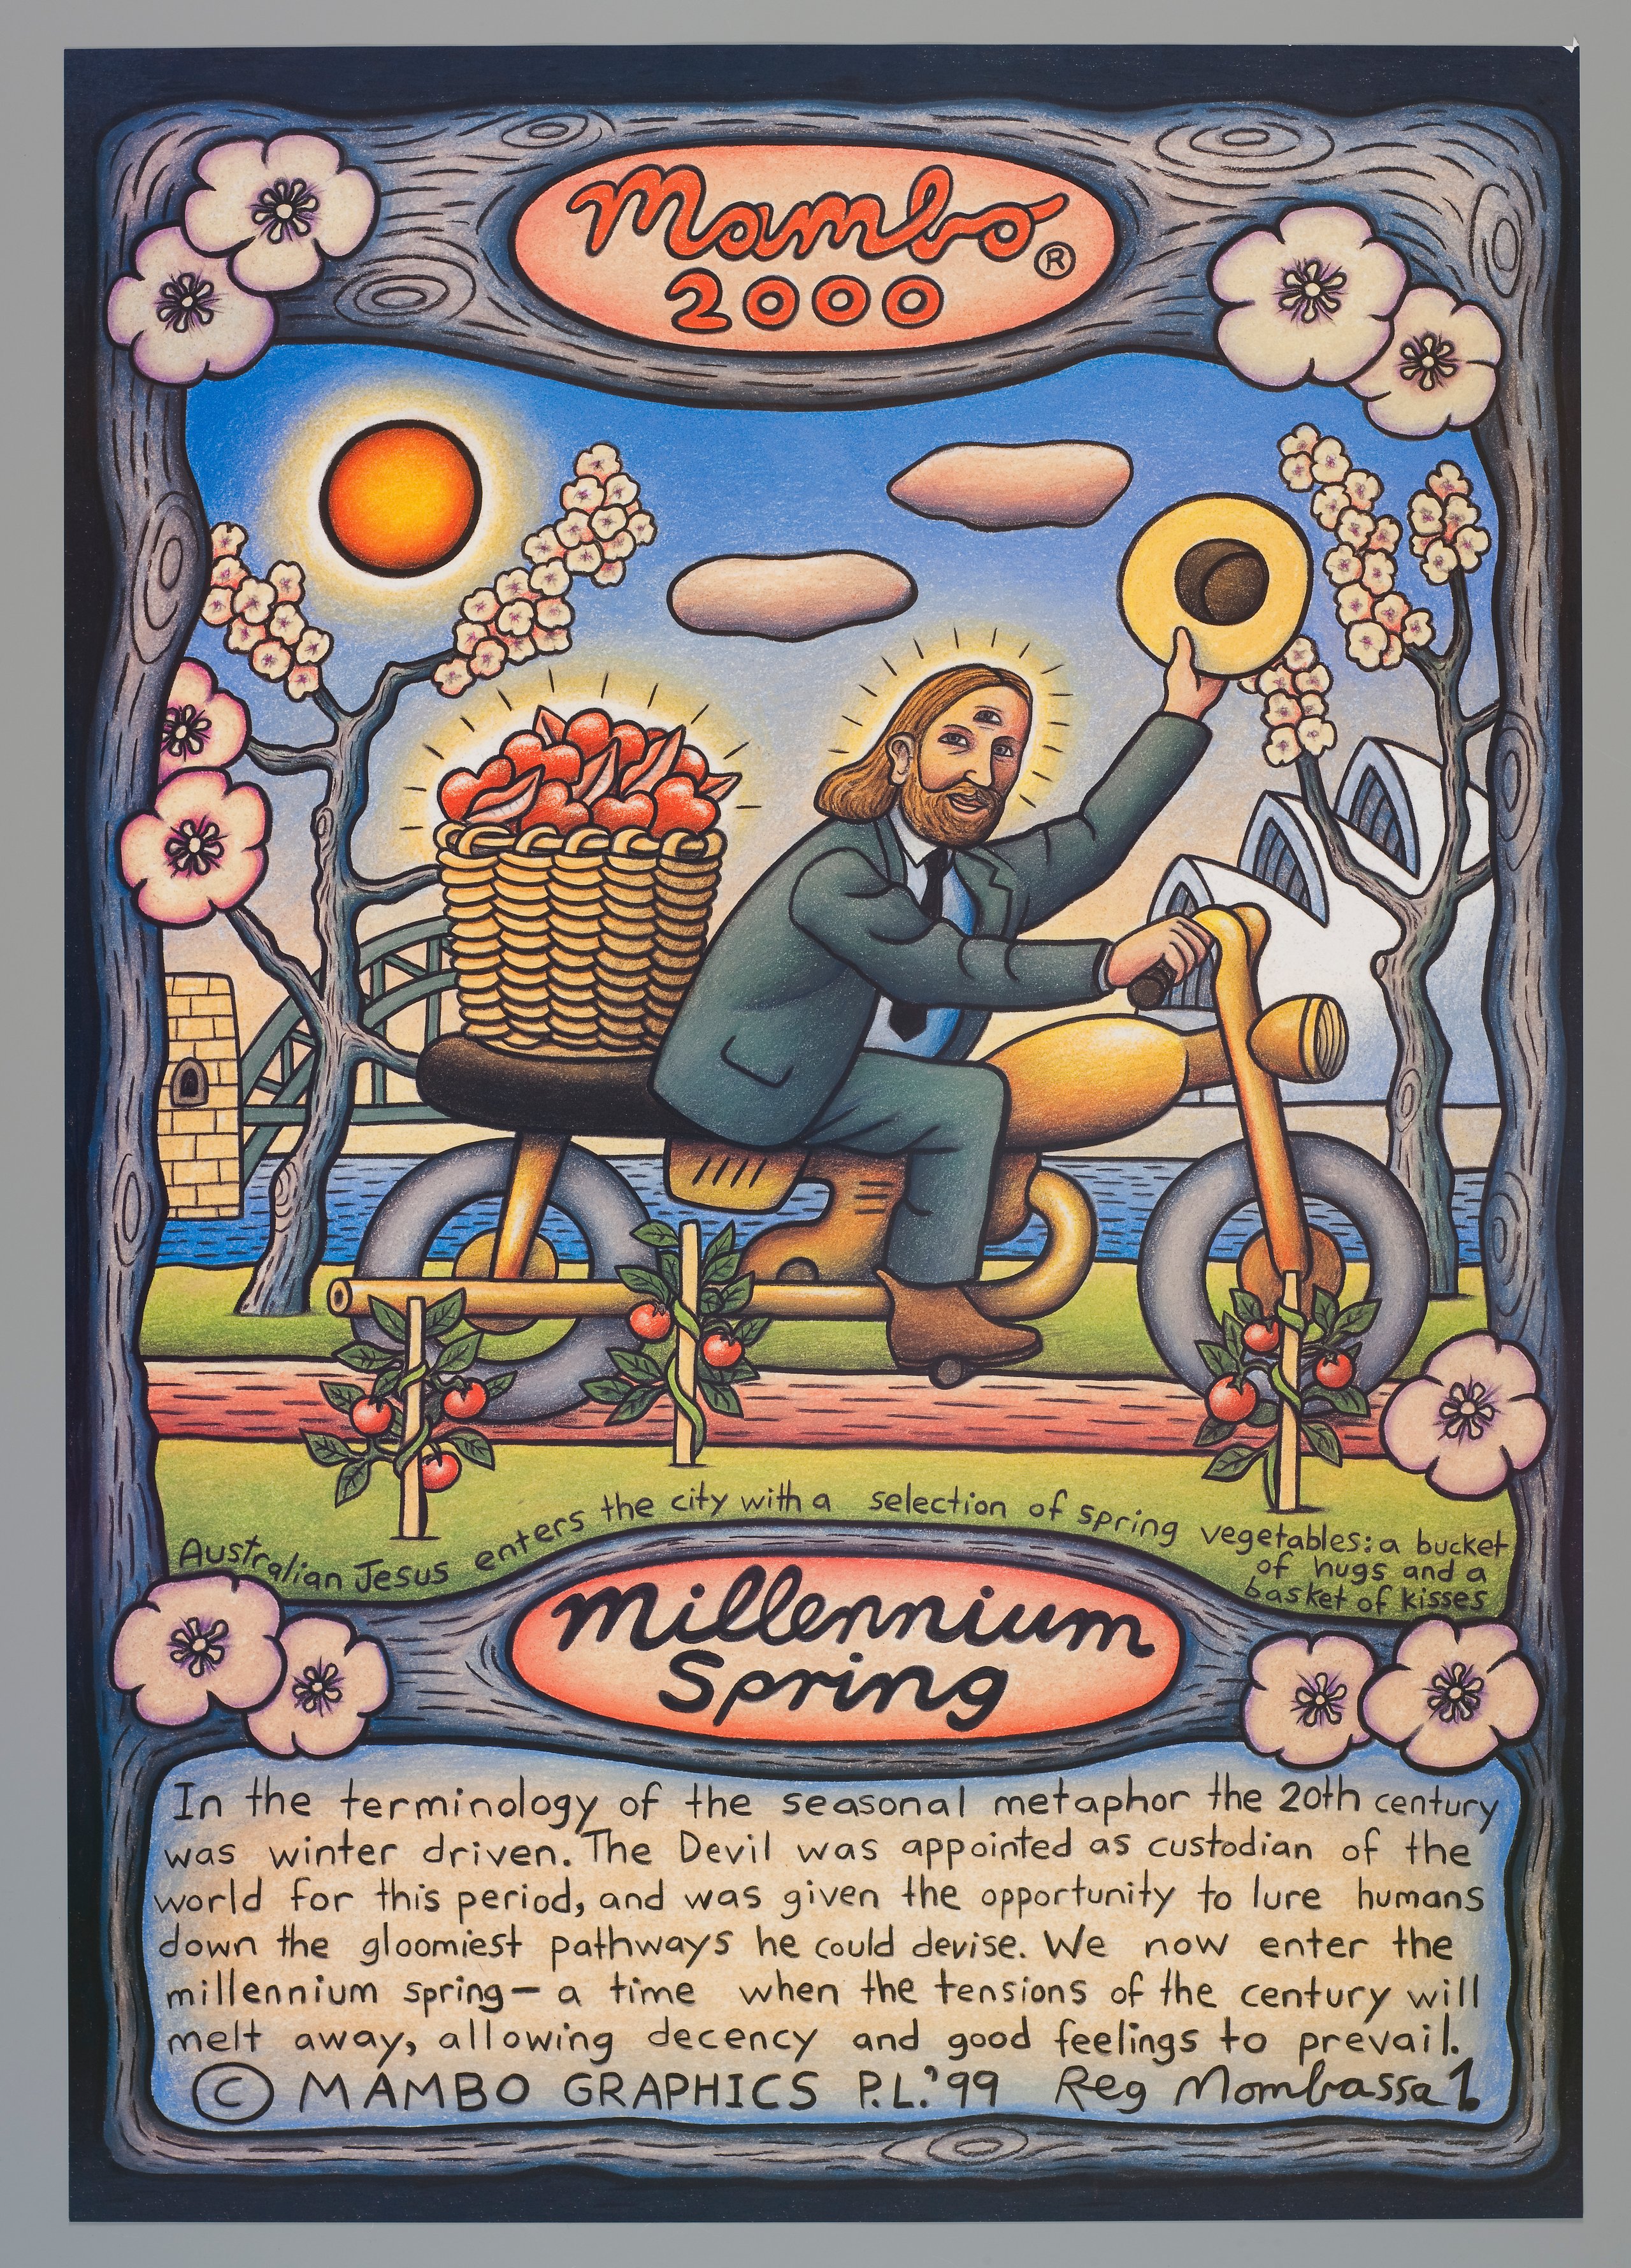 'Mambo 2000 Millennium Spring' posters by Reg Mombassa for Mambo Graphics